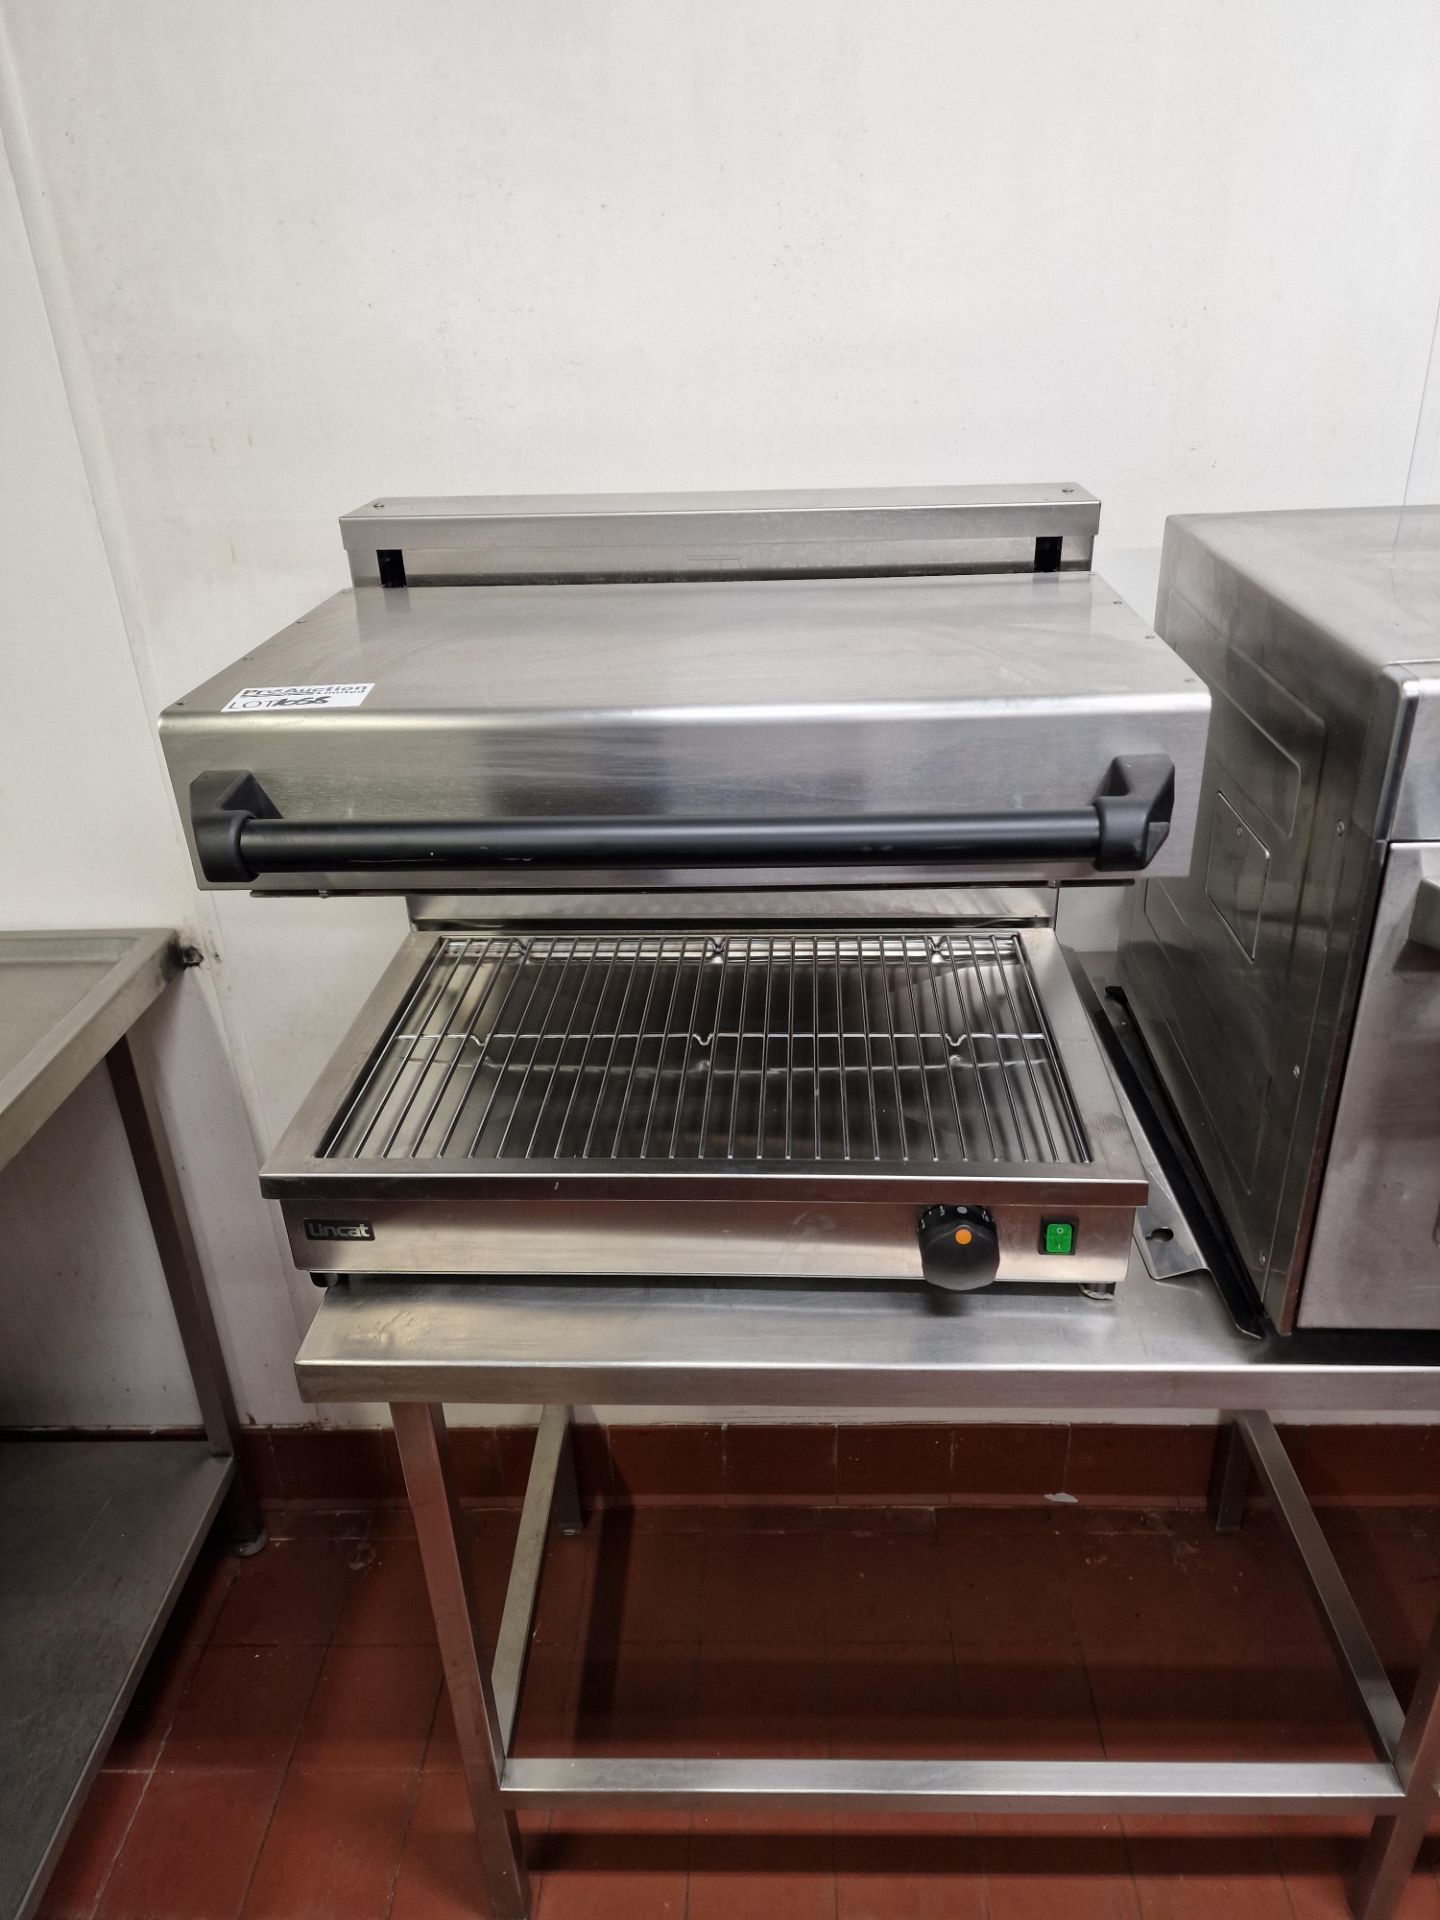 Lincat Silverlink 600 AS3 Electric Counter-Top Adjustable Salamander Grill Cooking Area: 532(W) x - Image 2 of 2